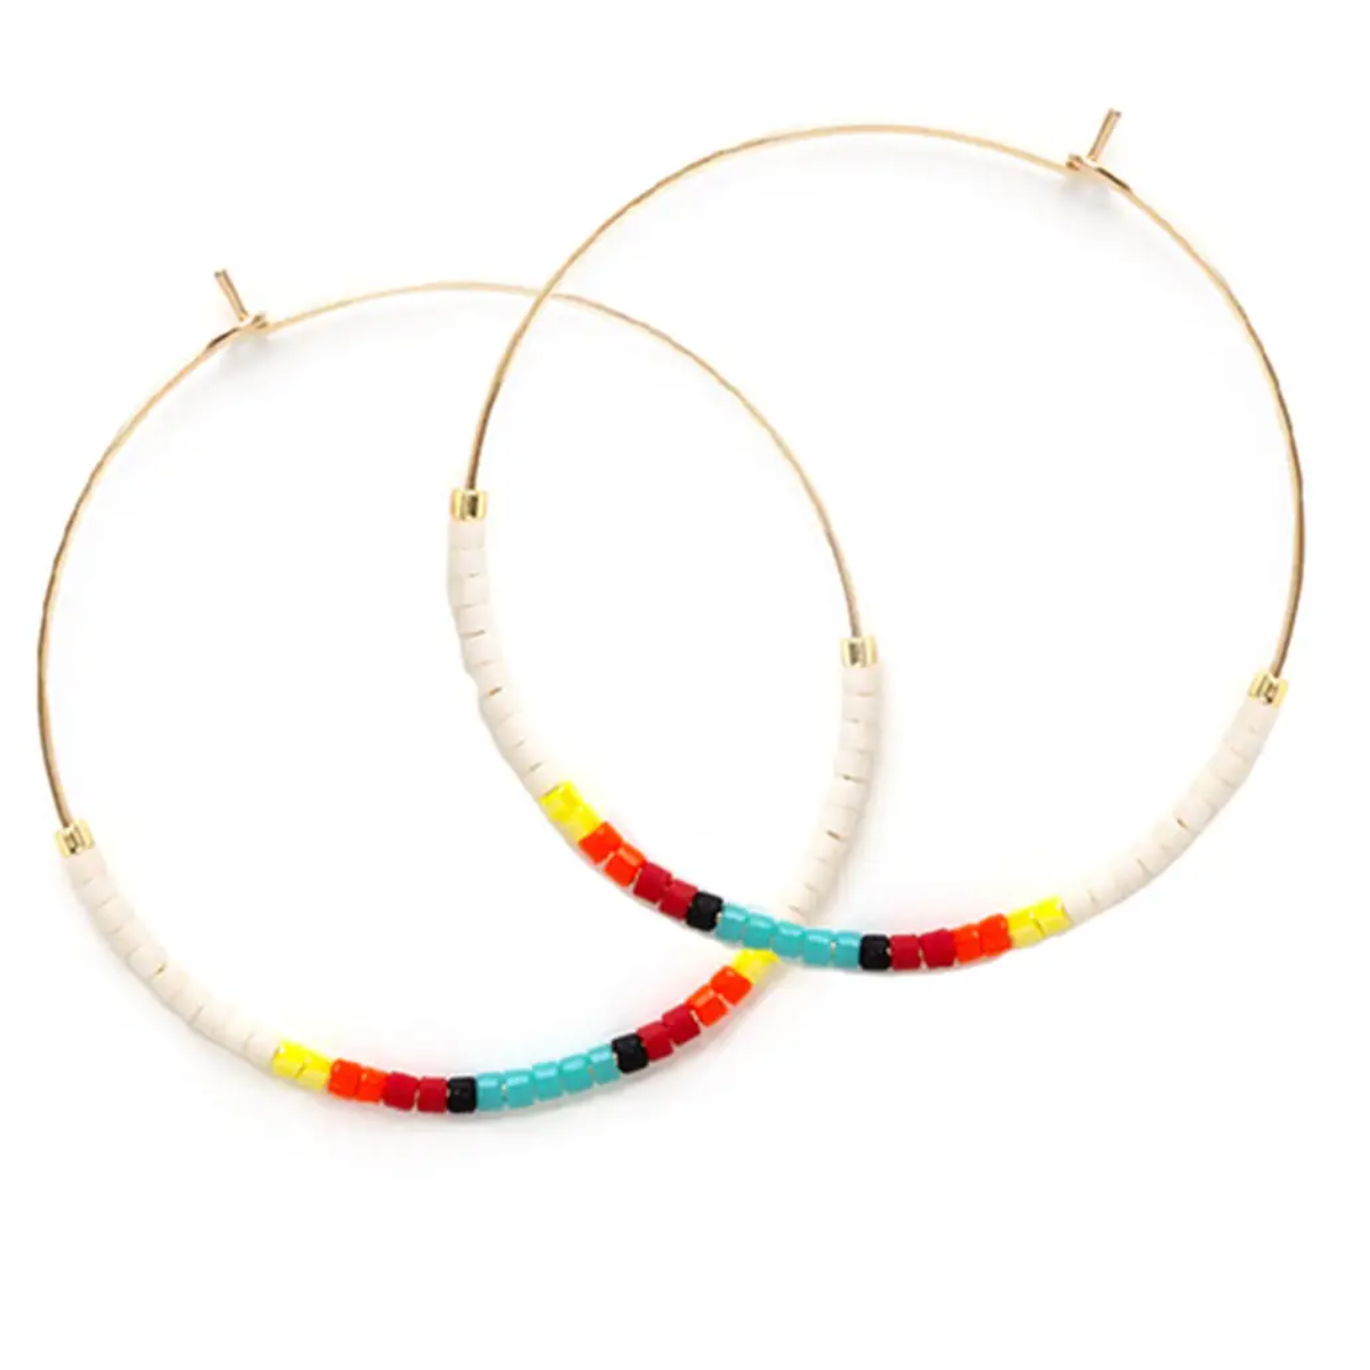 Japanese Seed Bead Hoops- New Mexico